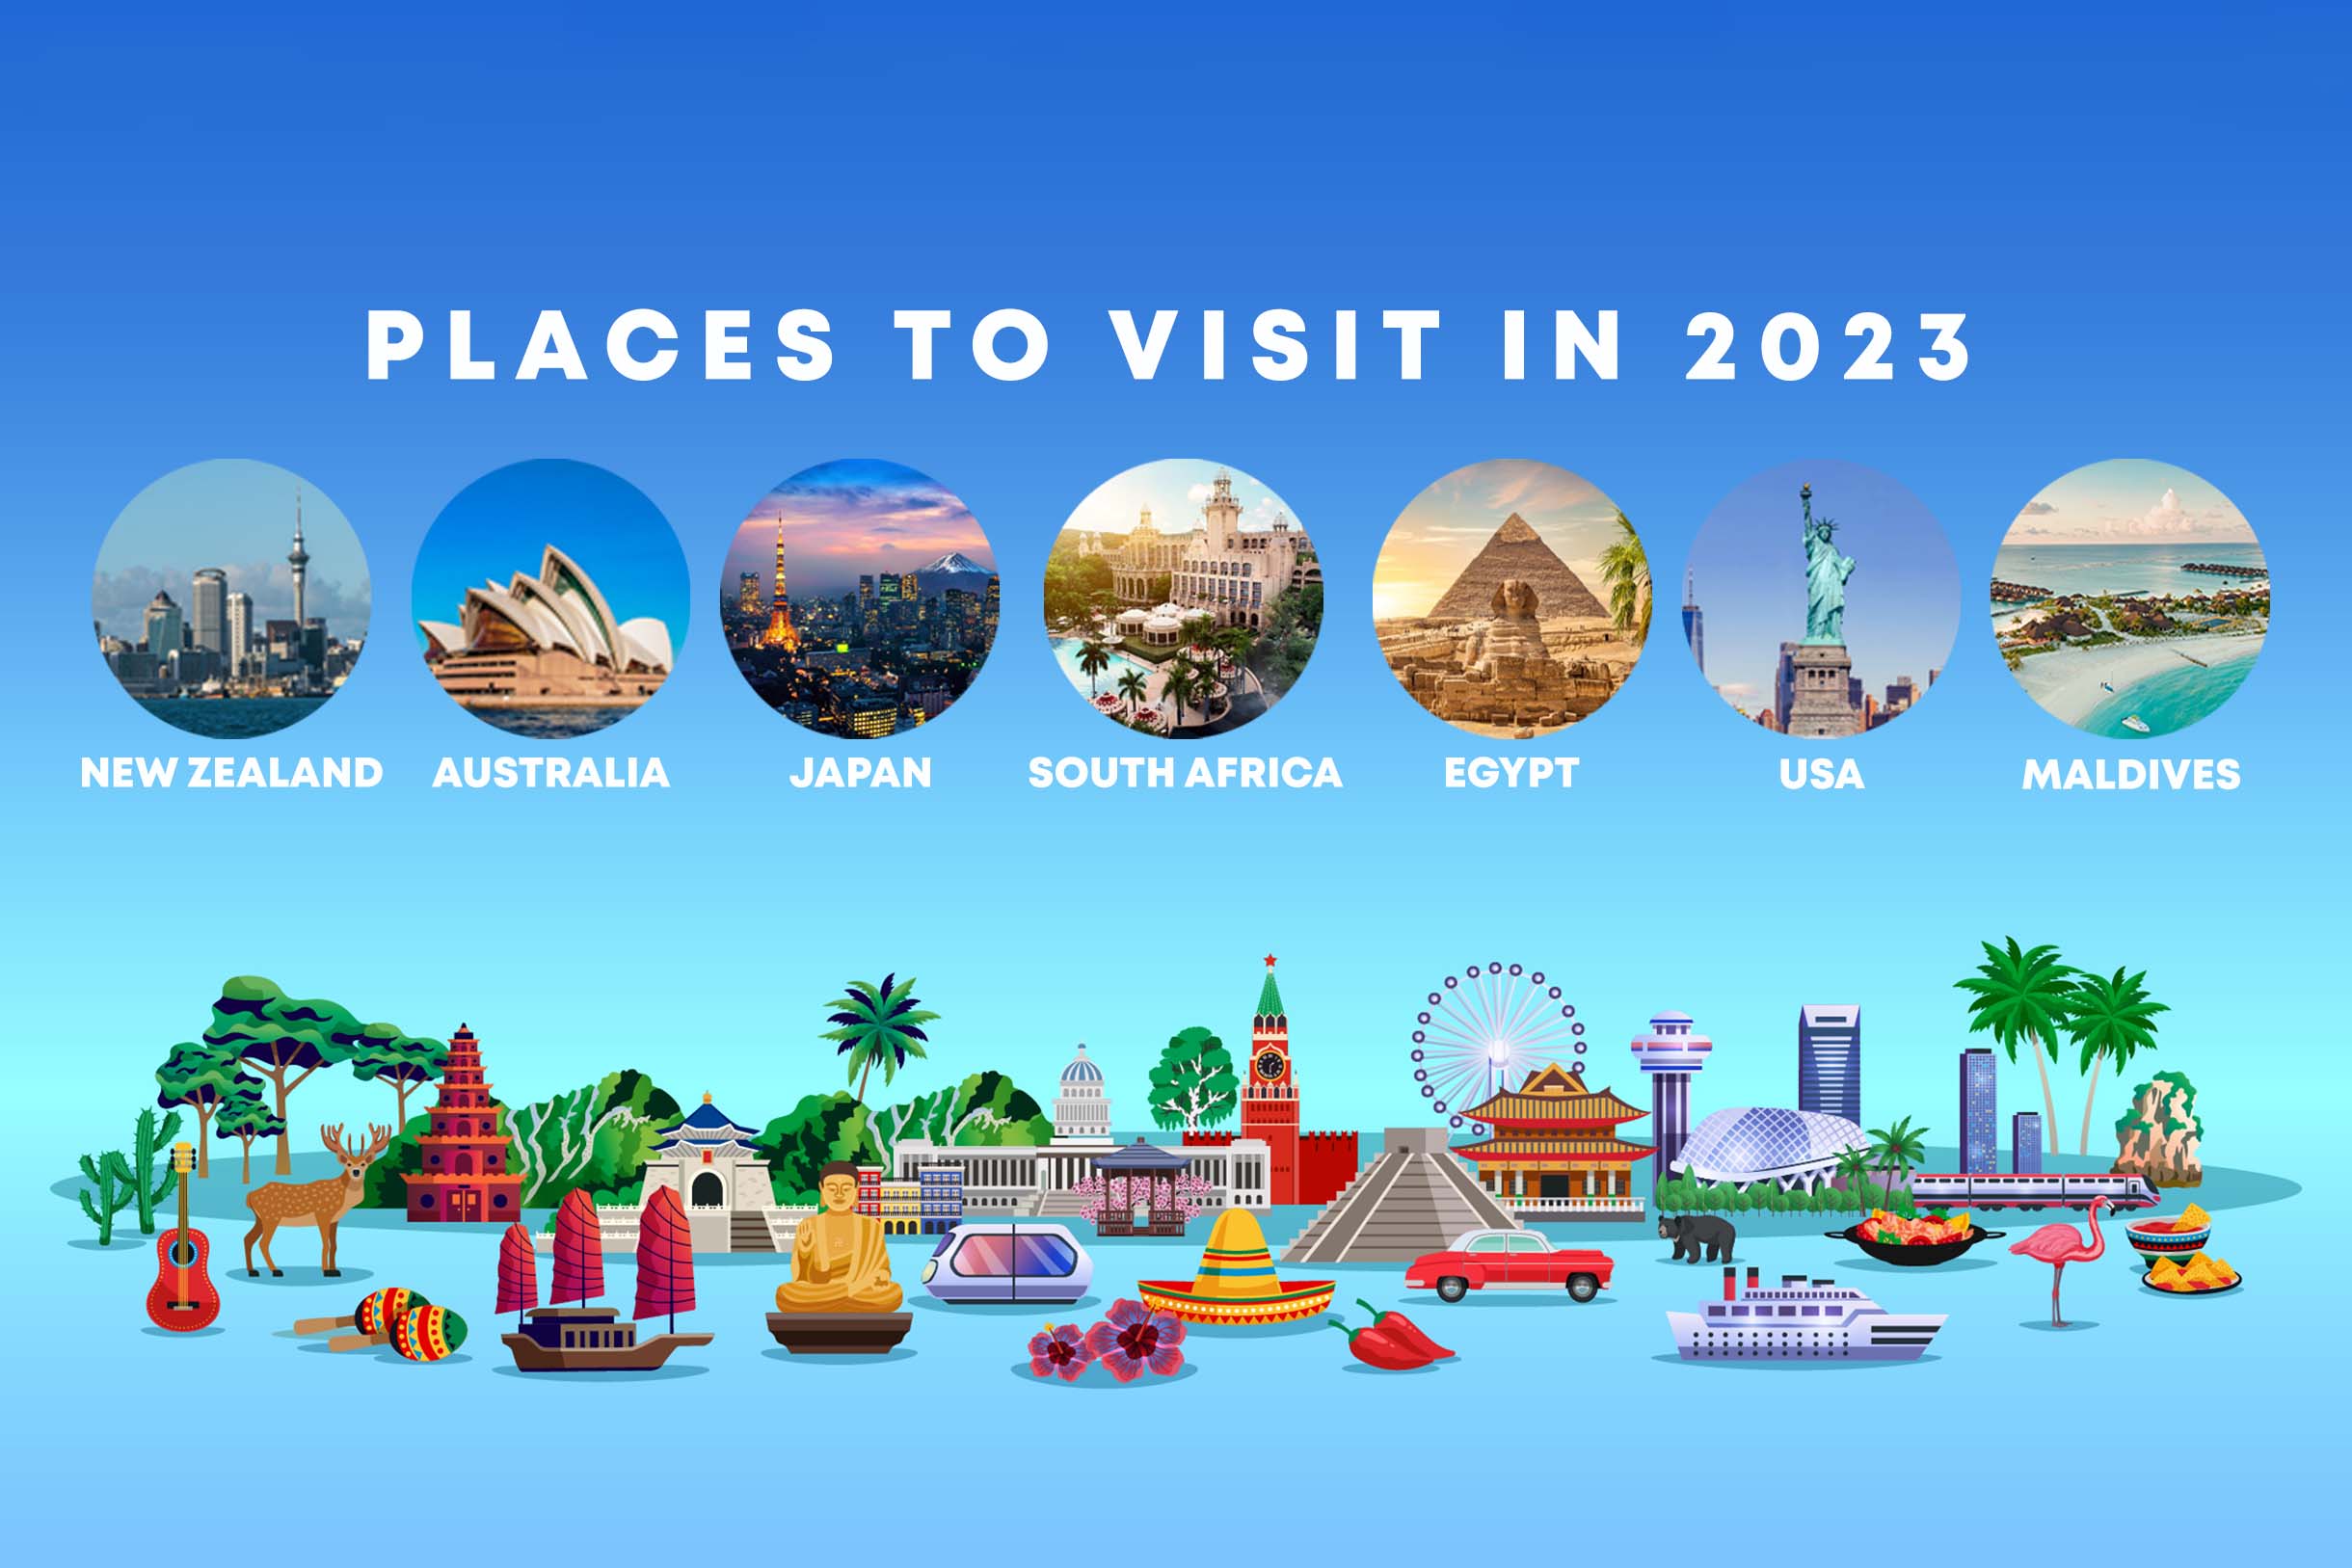 Places to visit in 2023